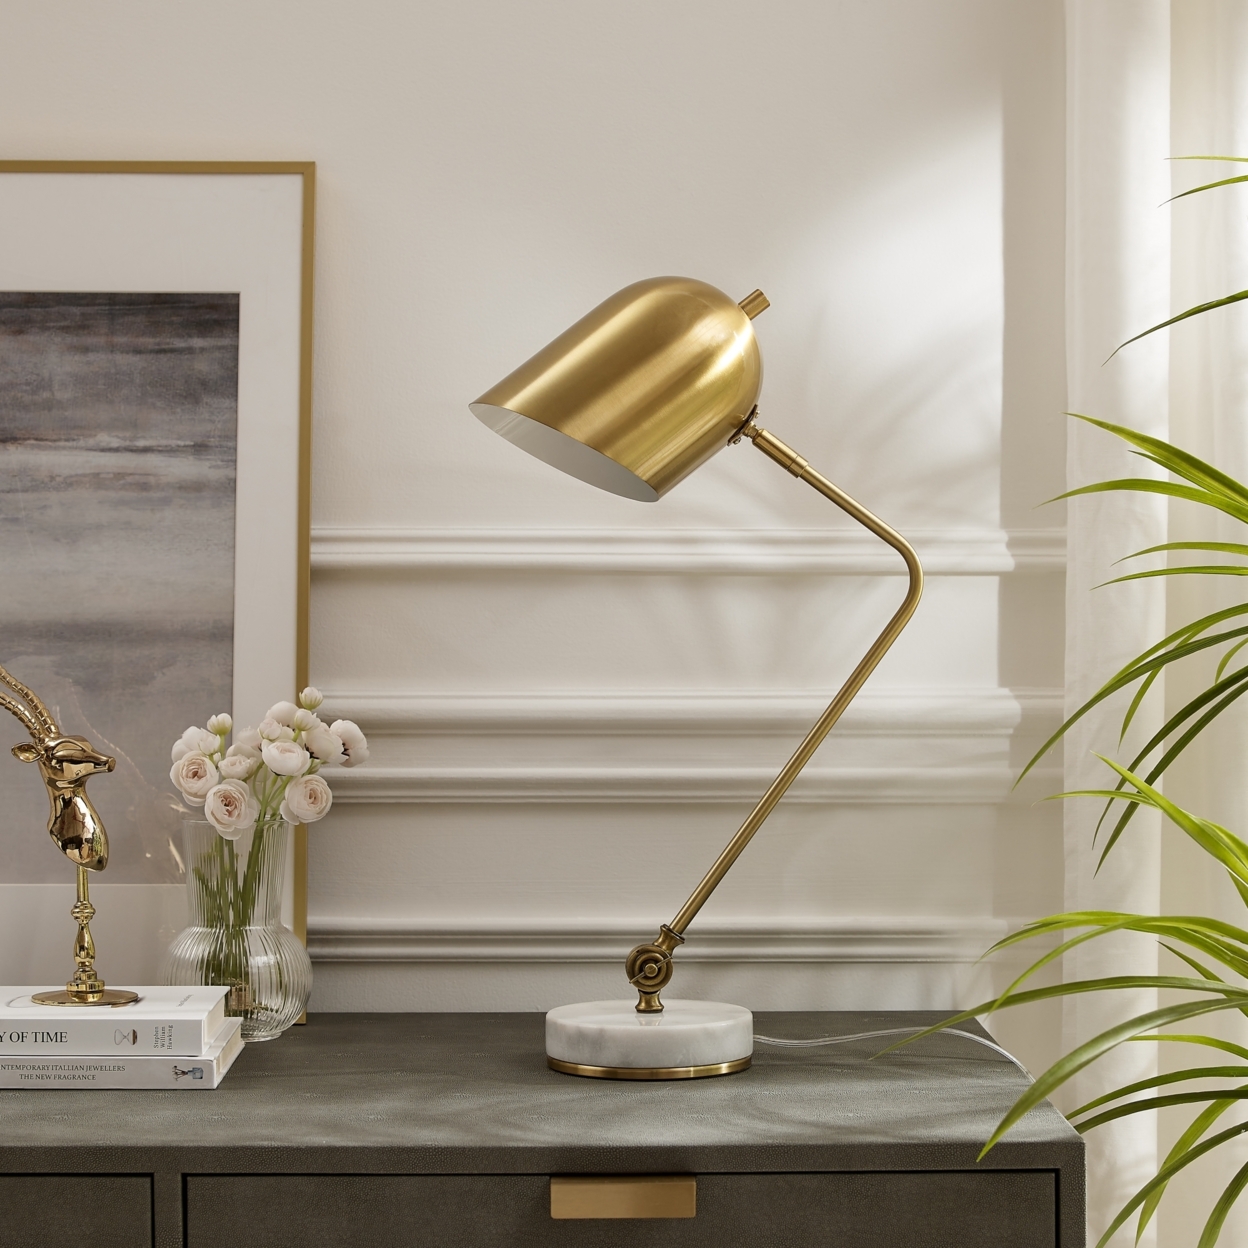 Vania Table Lamp - 5ft Power Cord, Marble Stone Base , Sturdy Metal Frame With Adjustable Angles , Rotary Switch - Brass